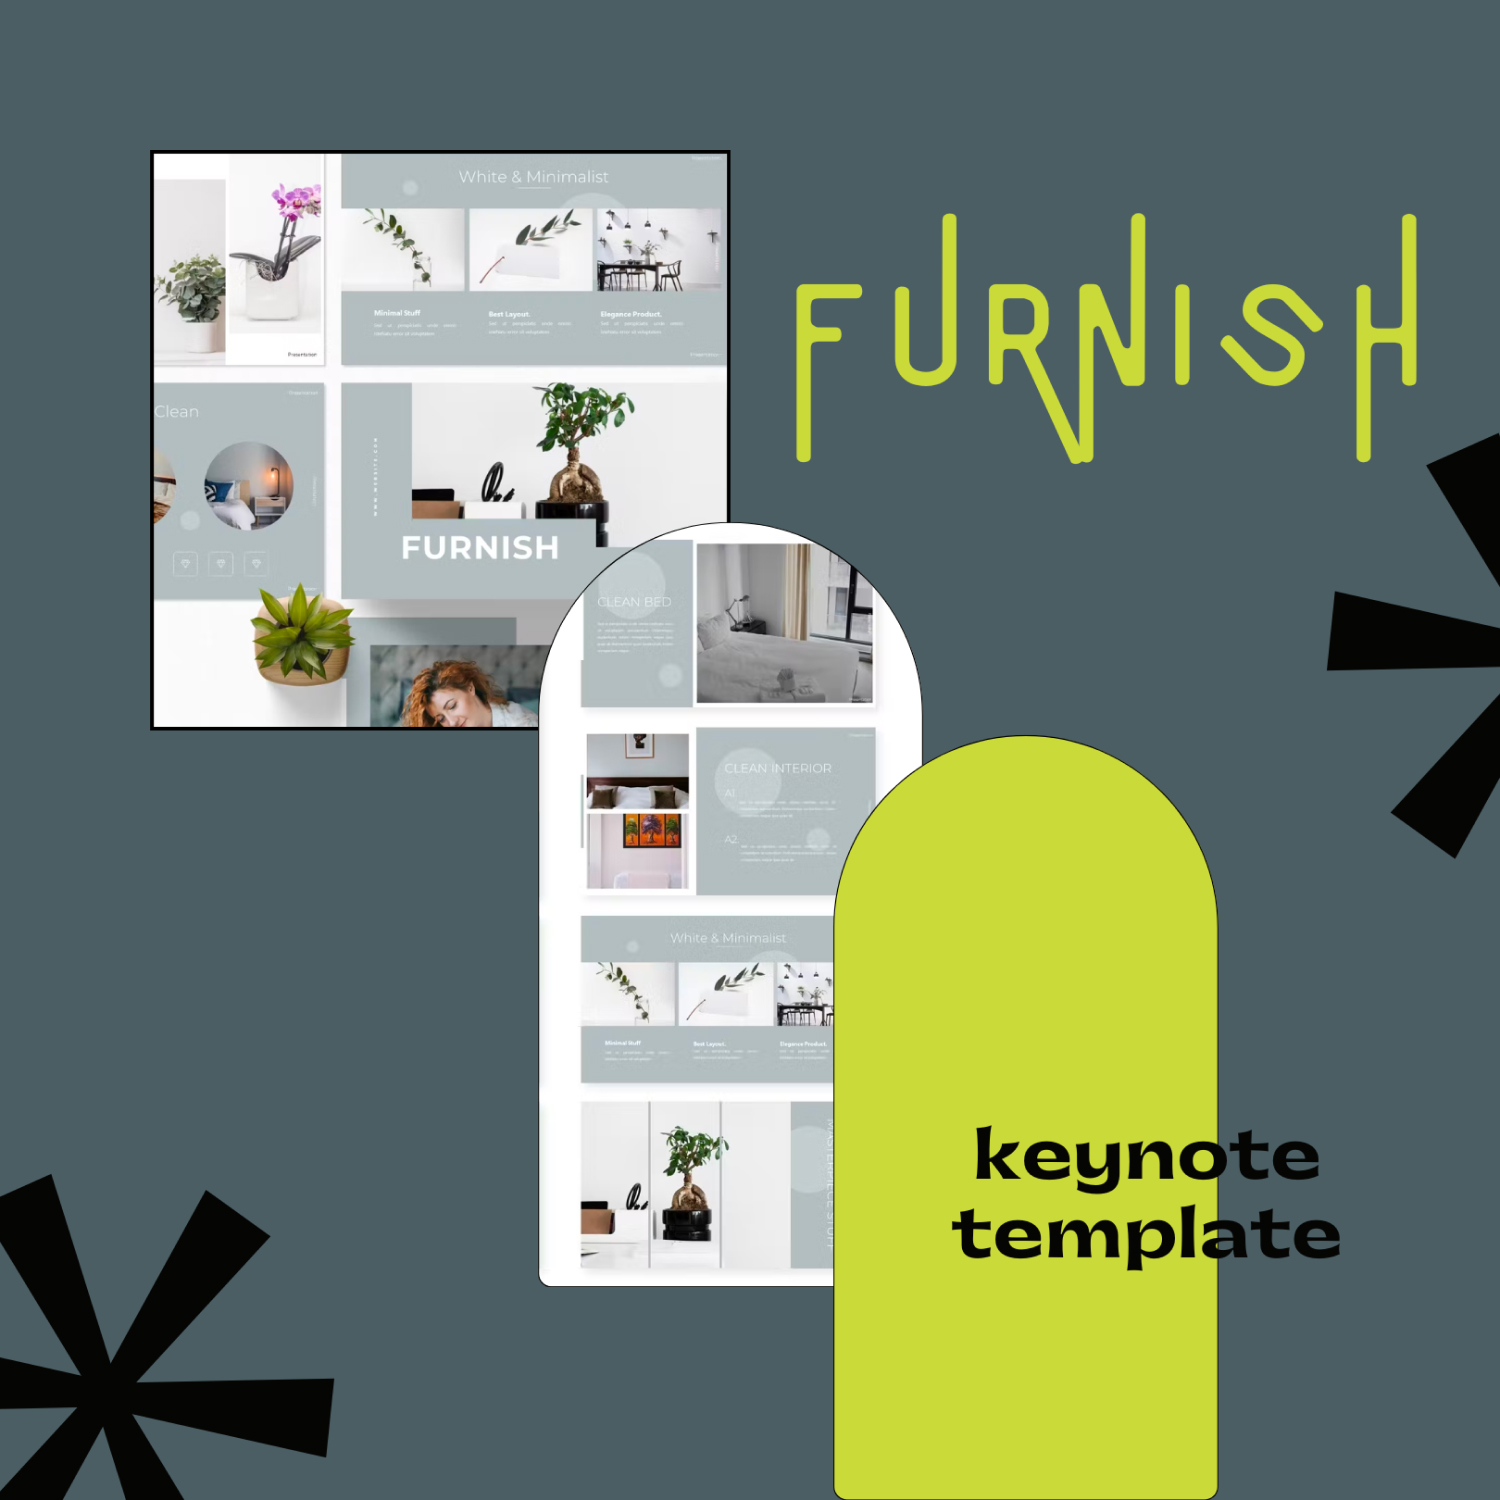 Preview images furnish keynote template.